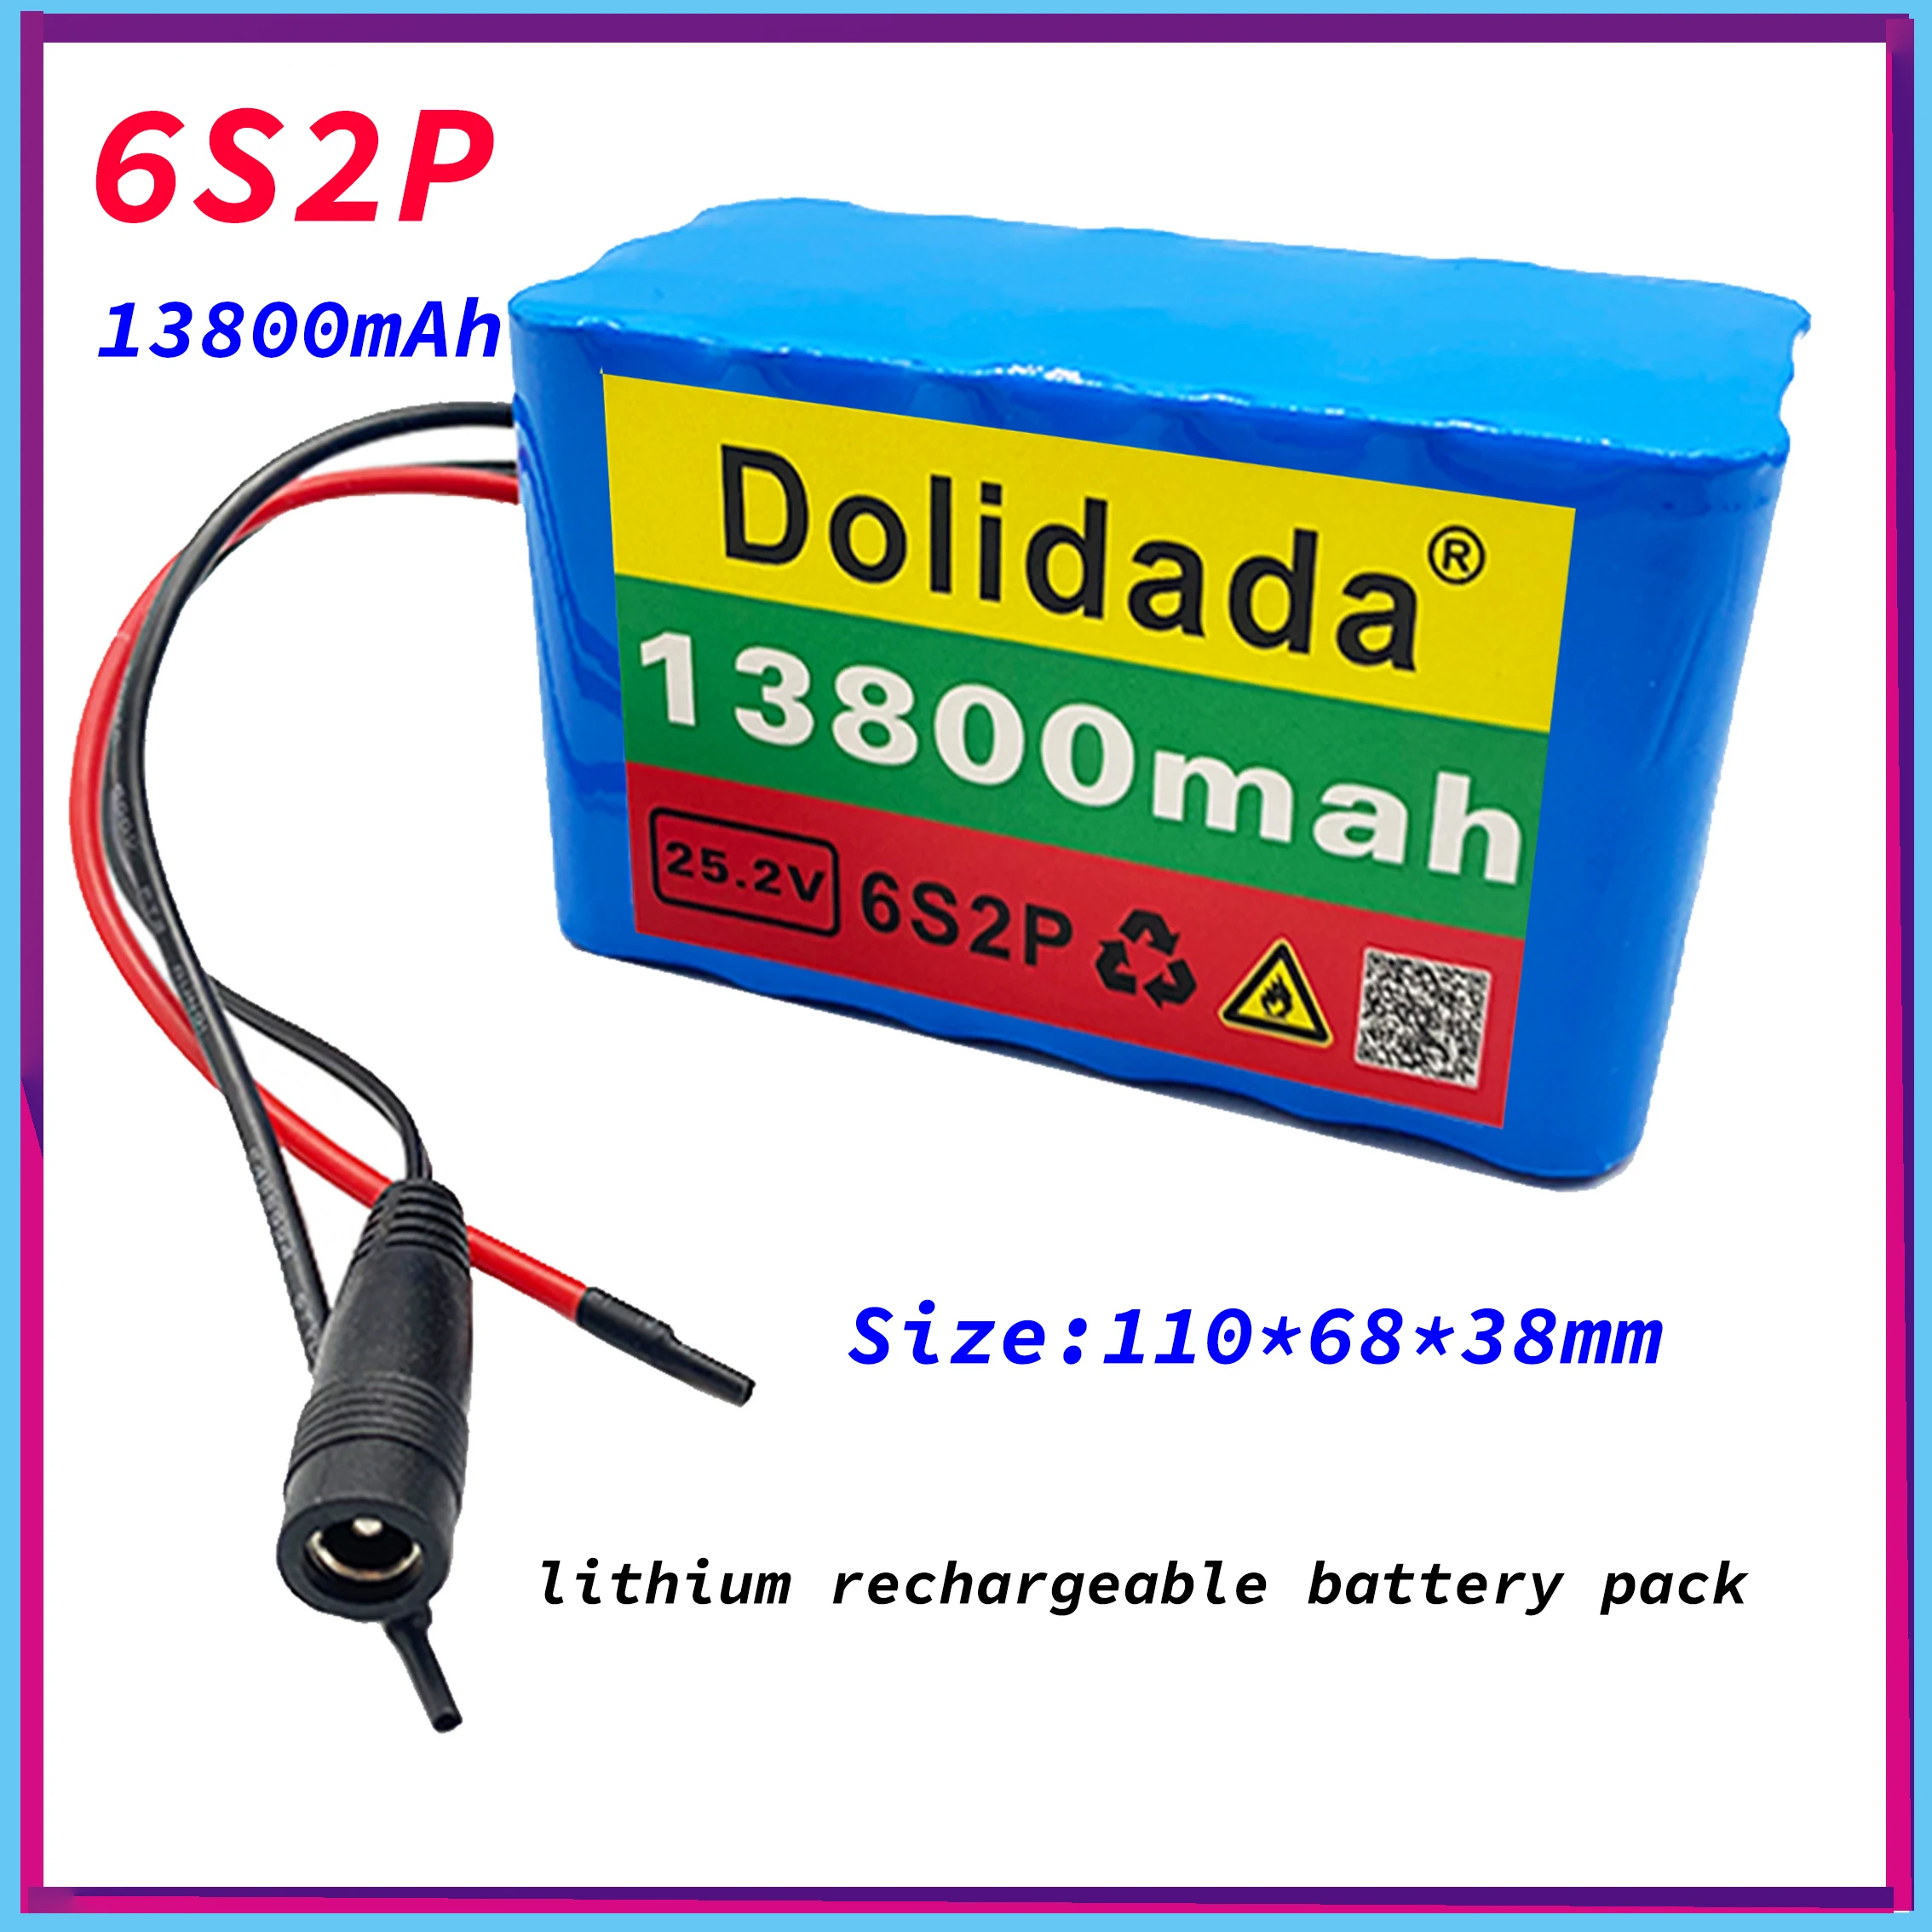 

24V 13800mAh 6s2p 18650 Battery Lithium Rechargeable Battery Pack 25.2v 13800mAh for Electric Bicycle Moped Wheelchair with BMS